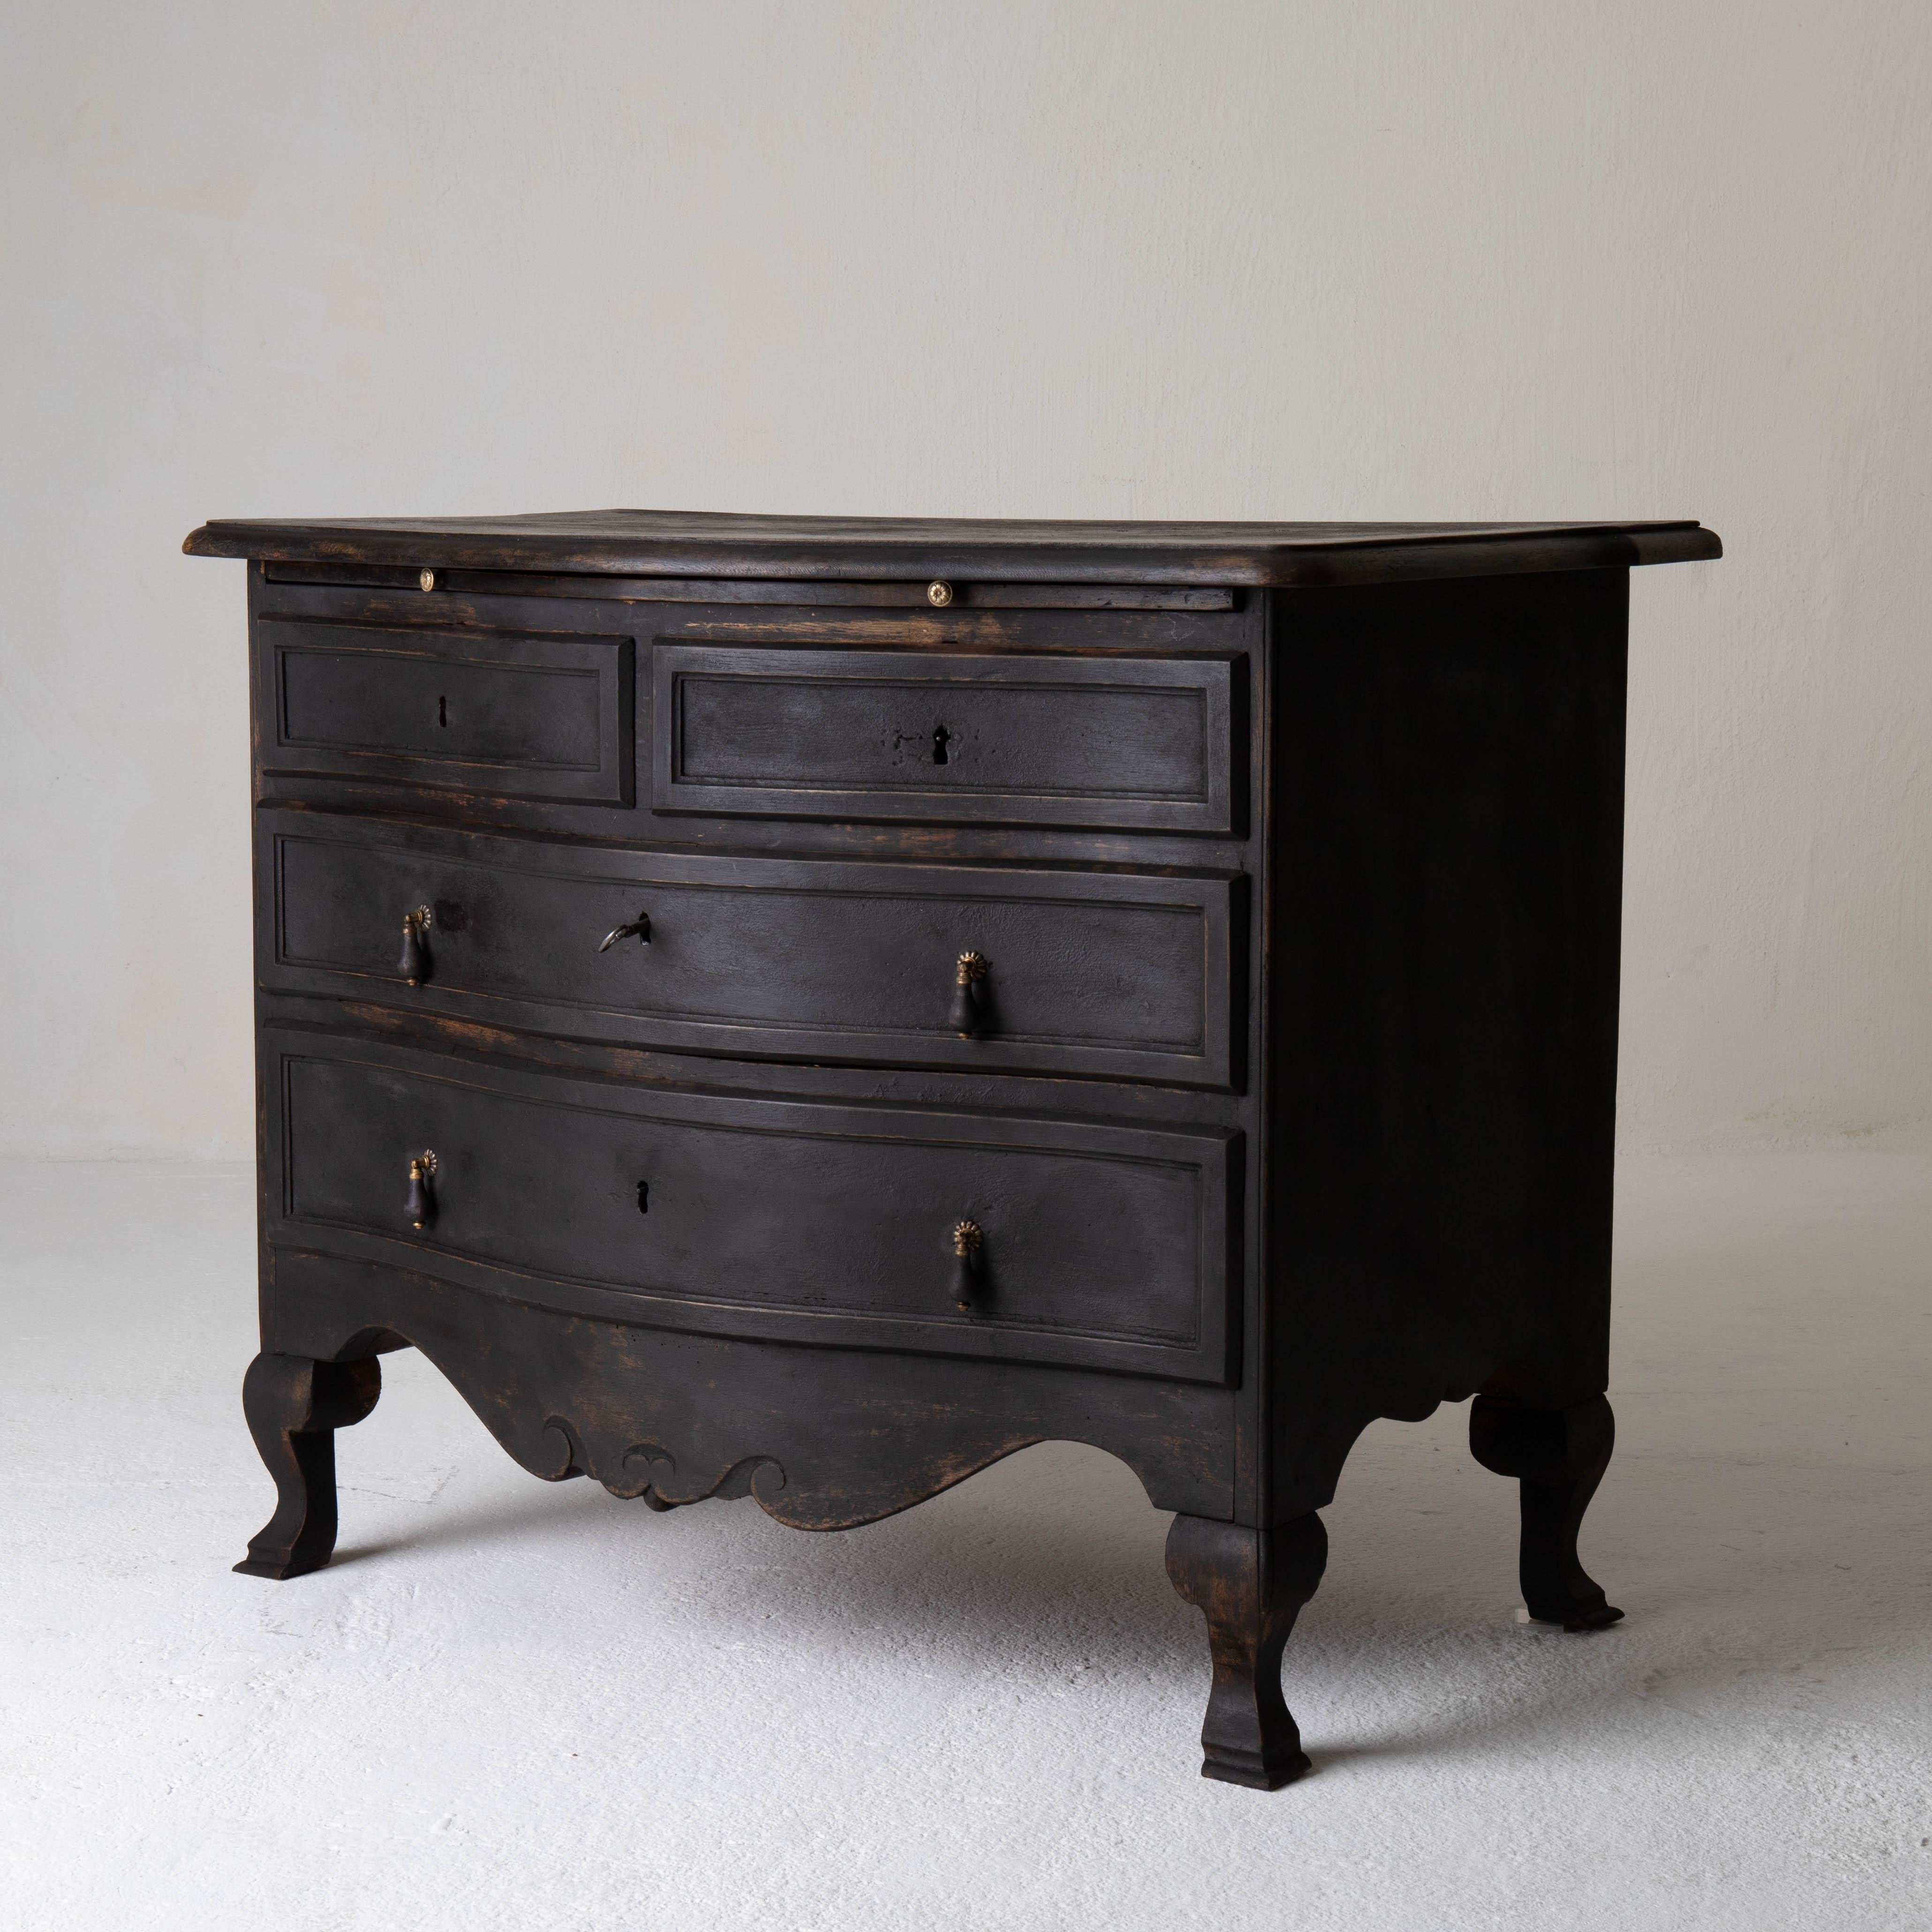 Chest of drawers Swedish black 18th century Sweden. A chest of drawers made during the Baroque period 1650-1750 in Sweden. Painted in our signature color Laserow Black.

 